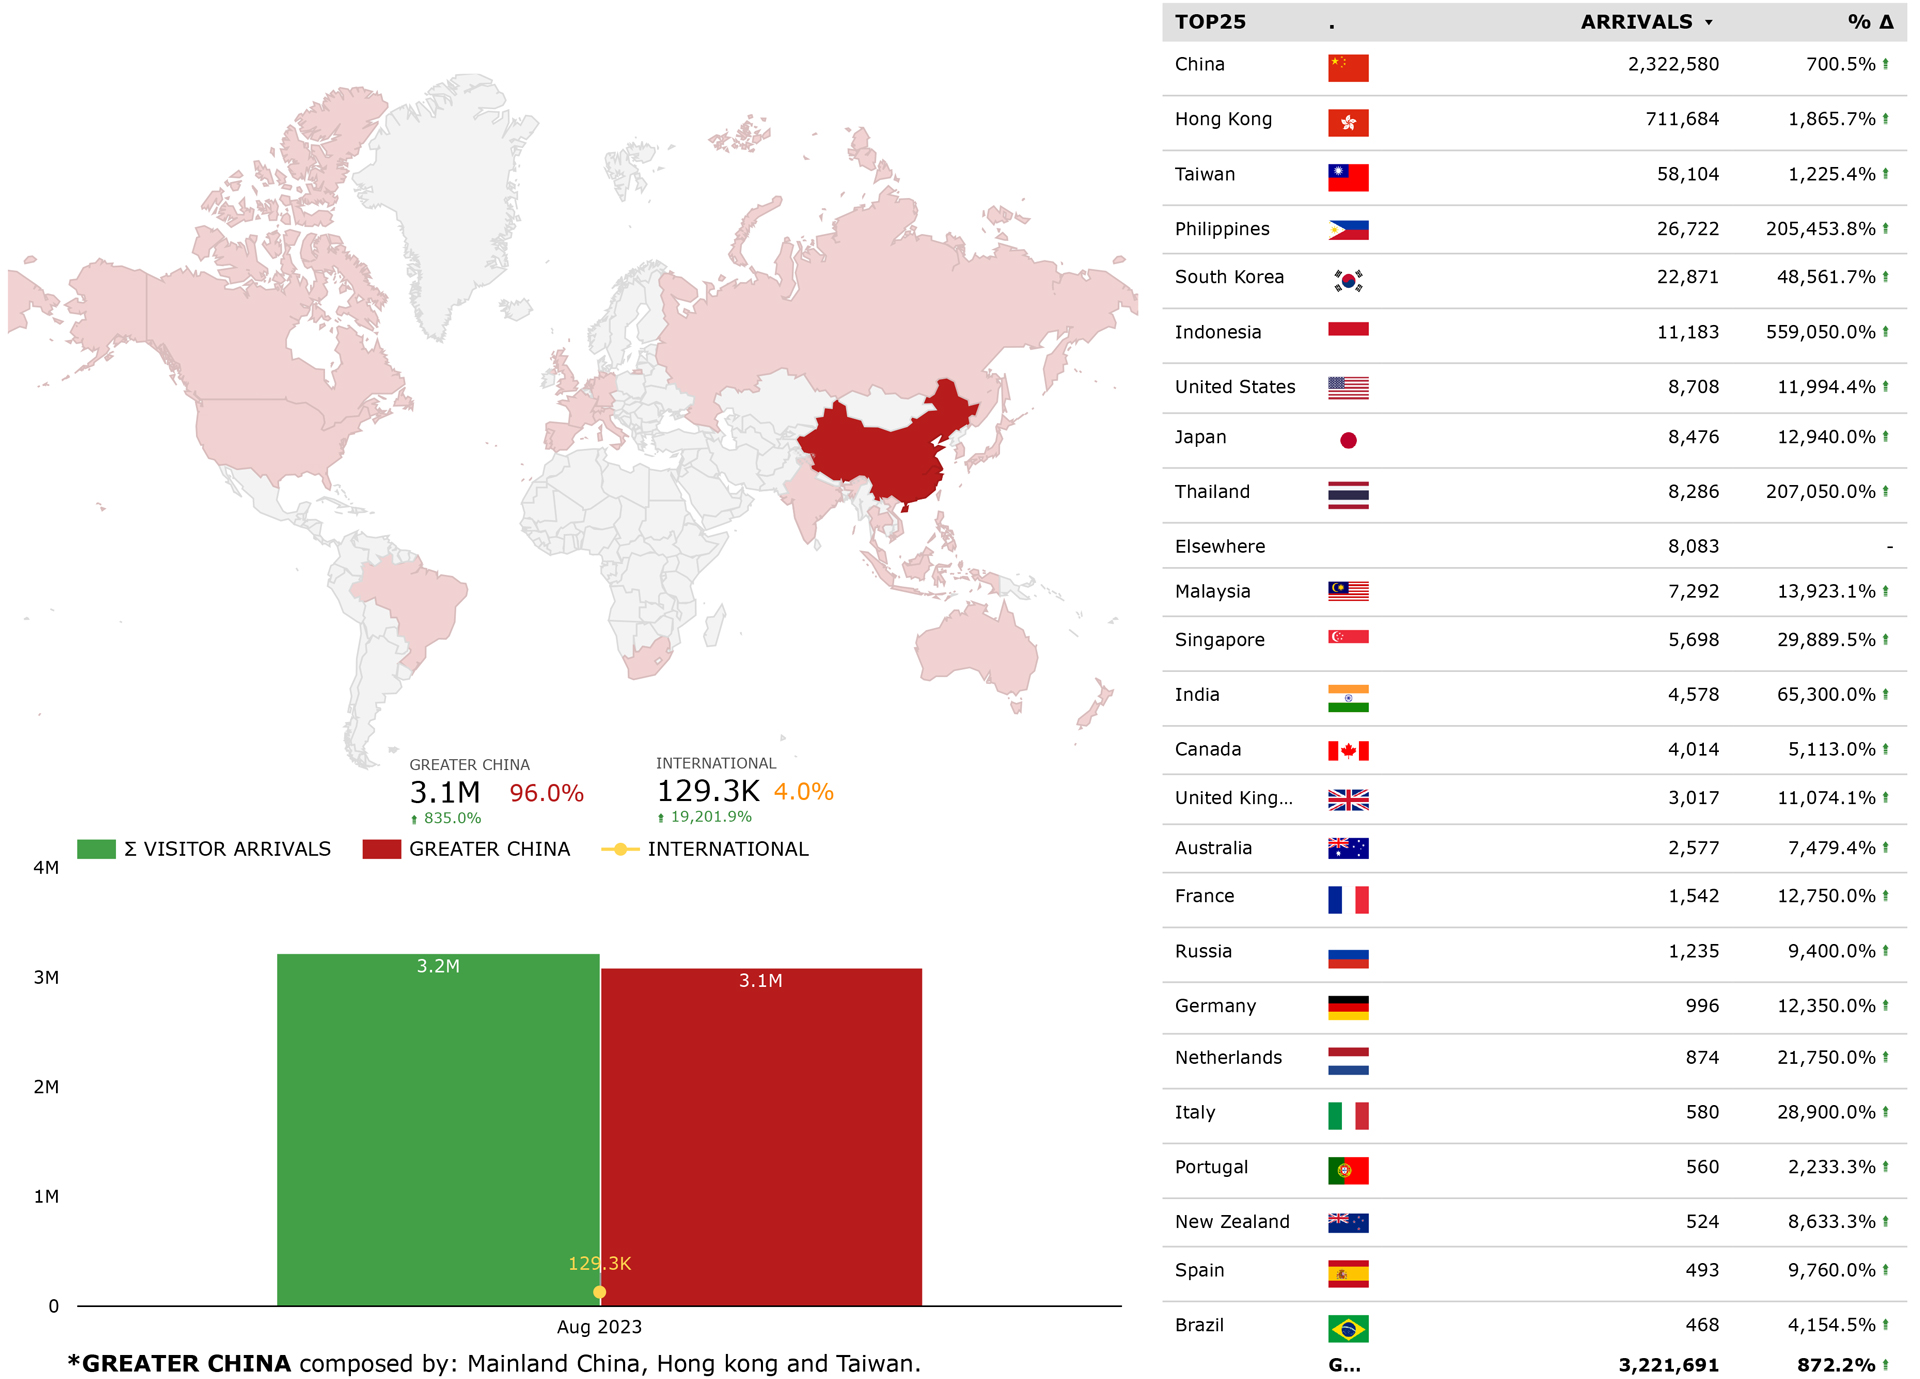 Macau_Visitor-Arrivals-per-country-in-AUG-2023